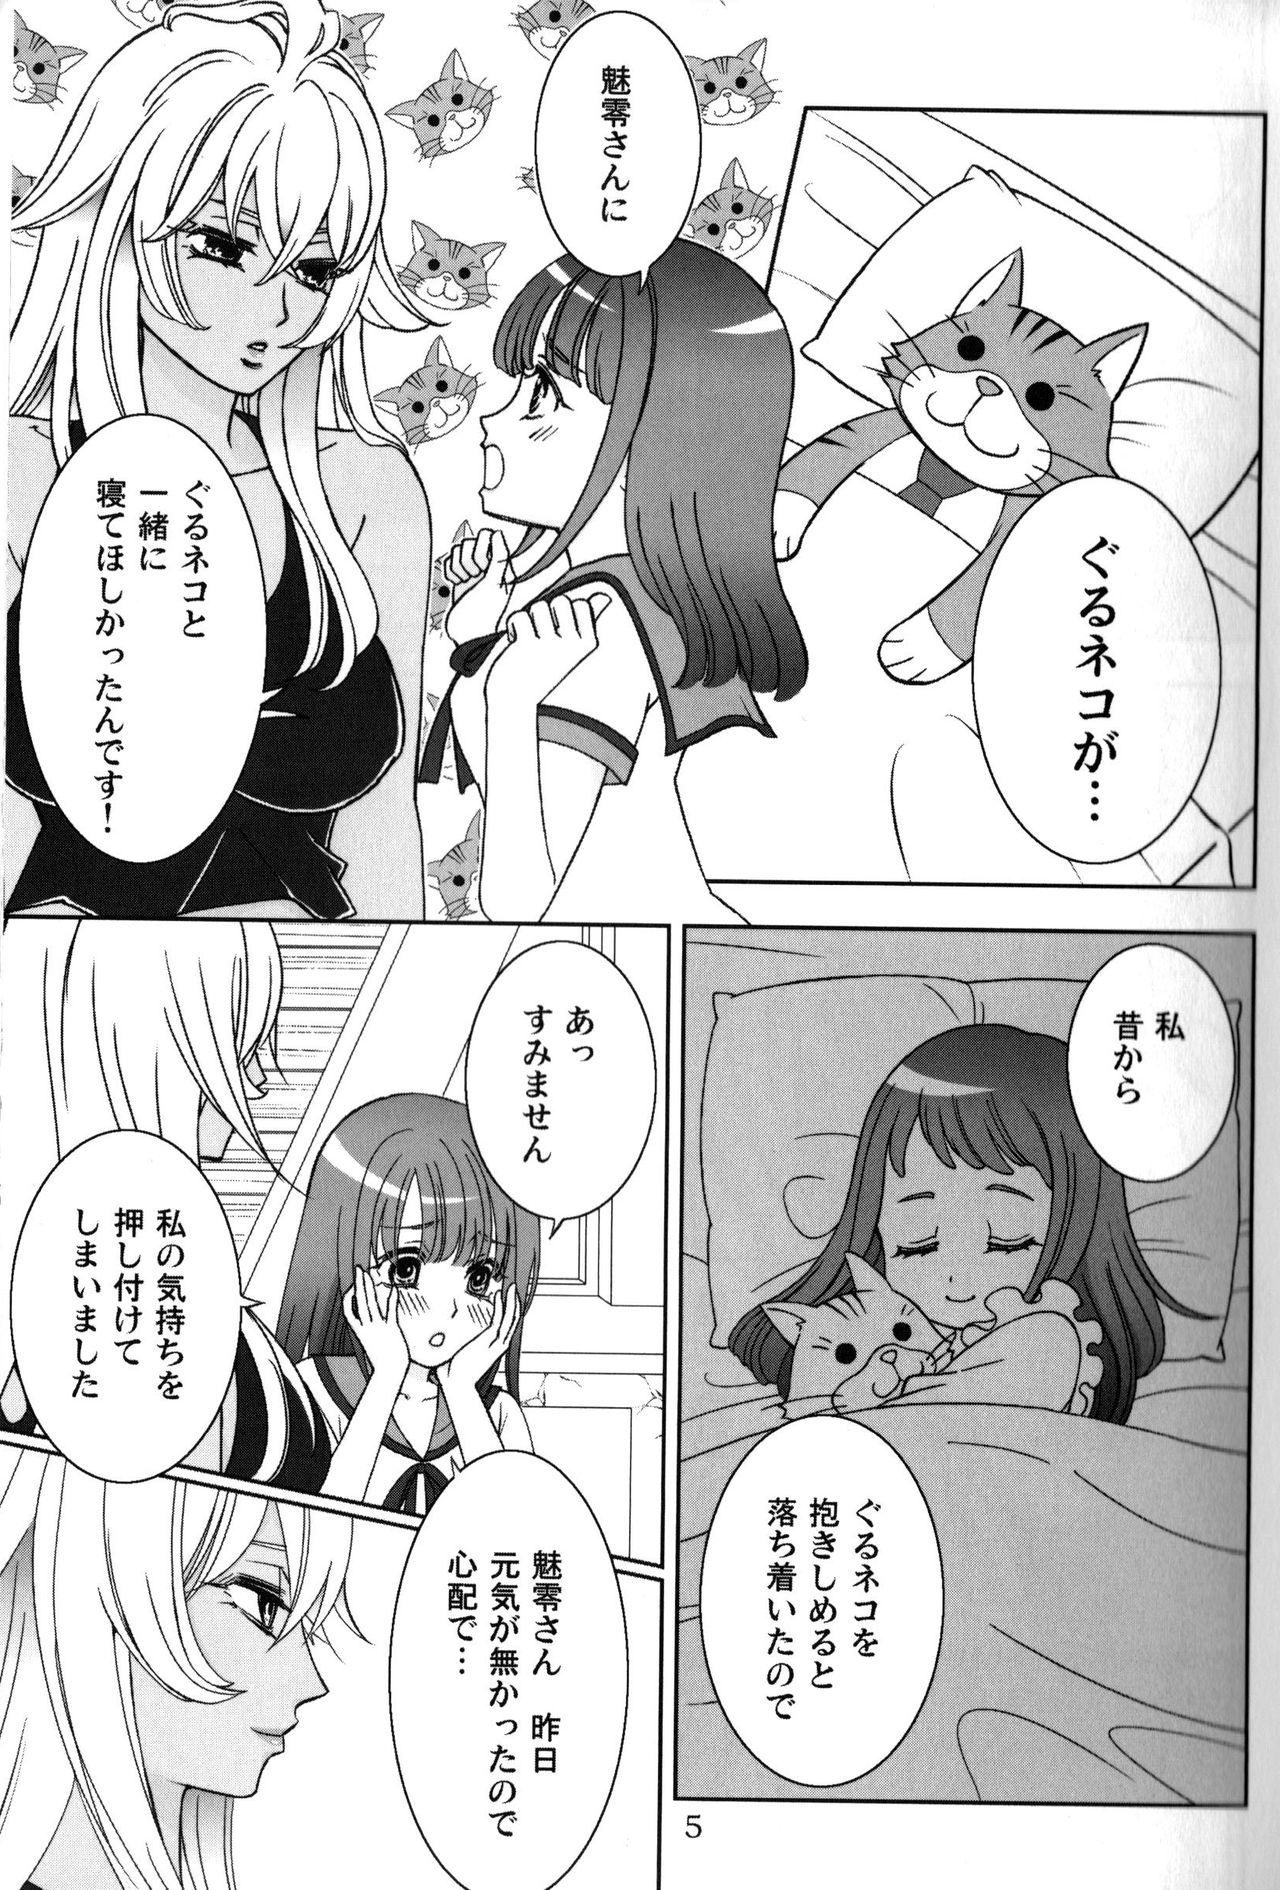 Massive Give it Away - Valkyrie drive Gay Toys - Page 4